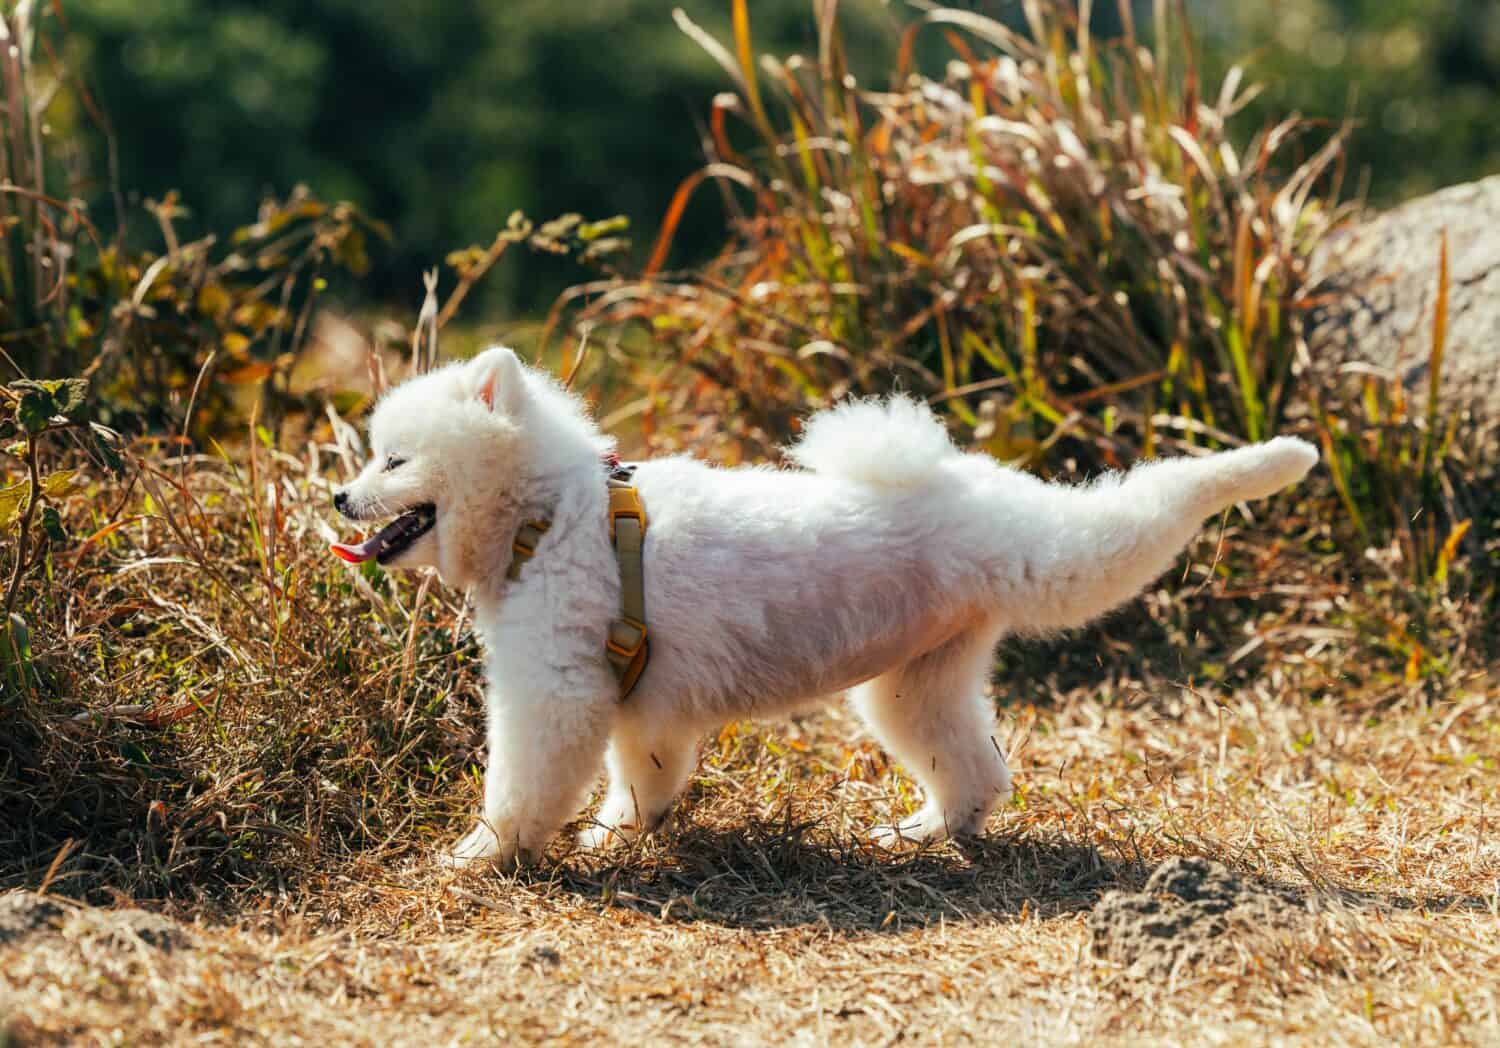 A fluffy white pomeranian puppy dog stretching her back legs enjoying a sunny day out